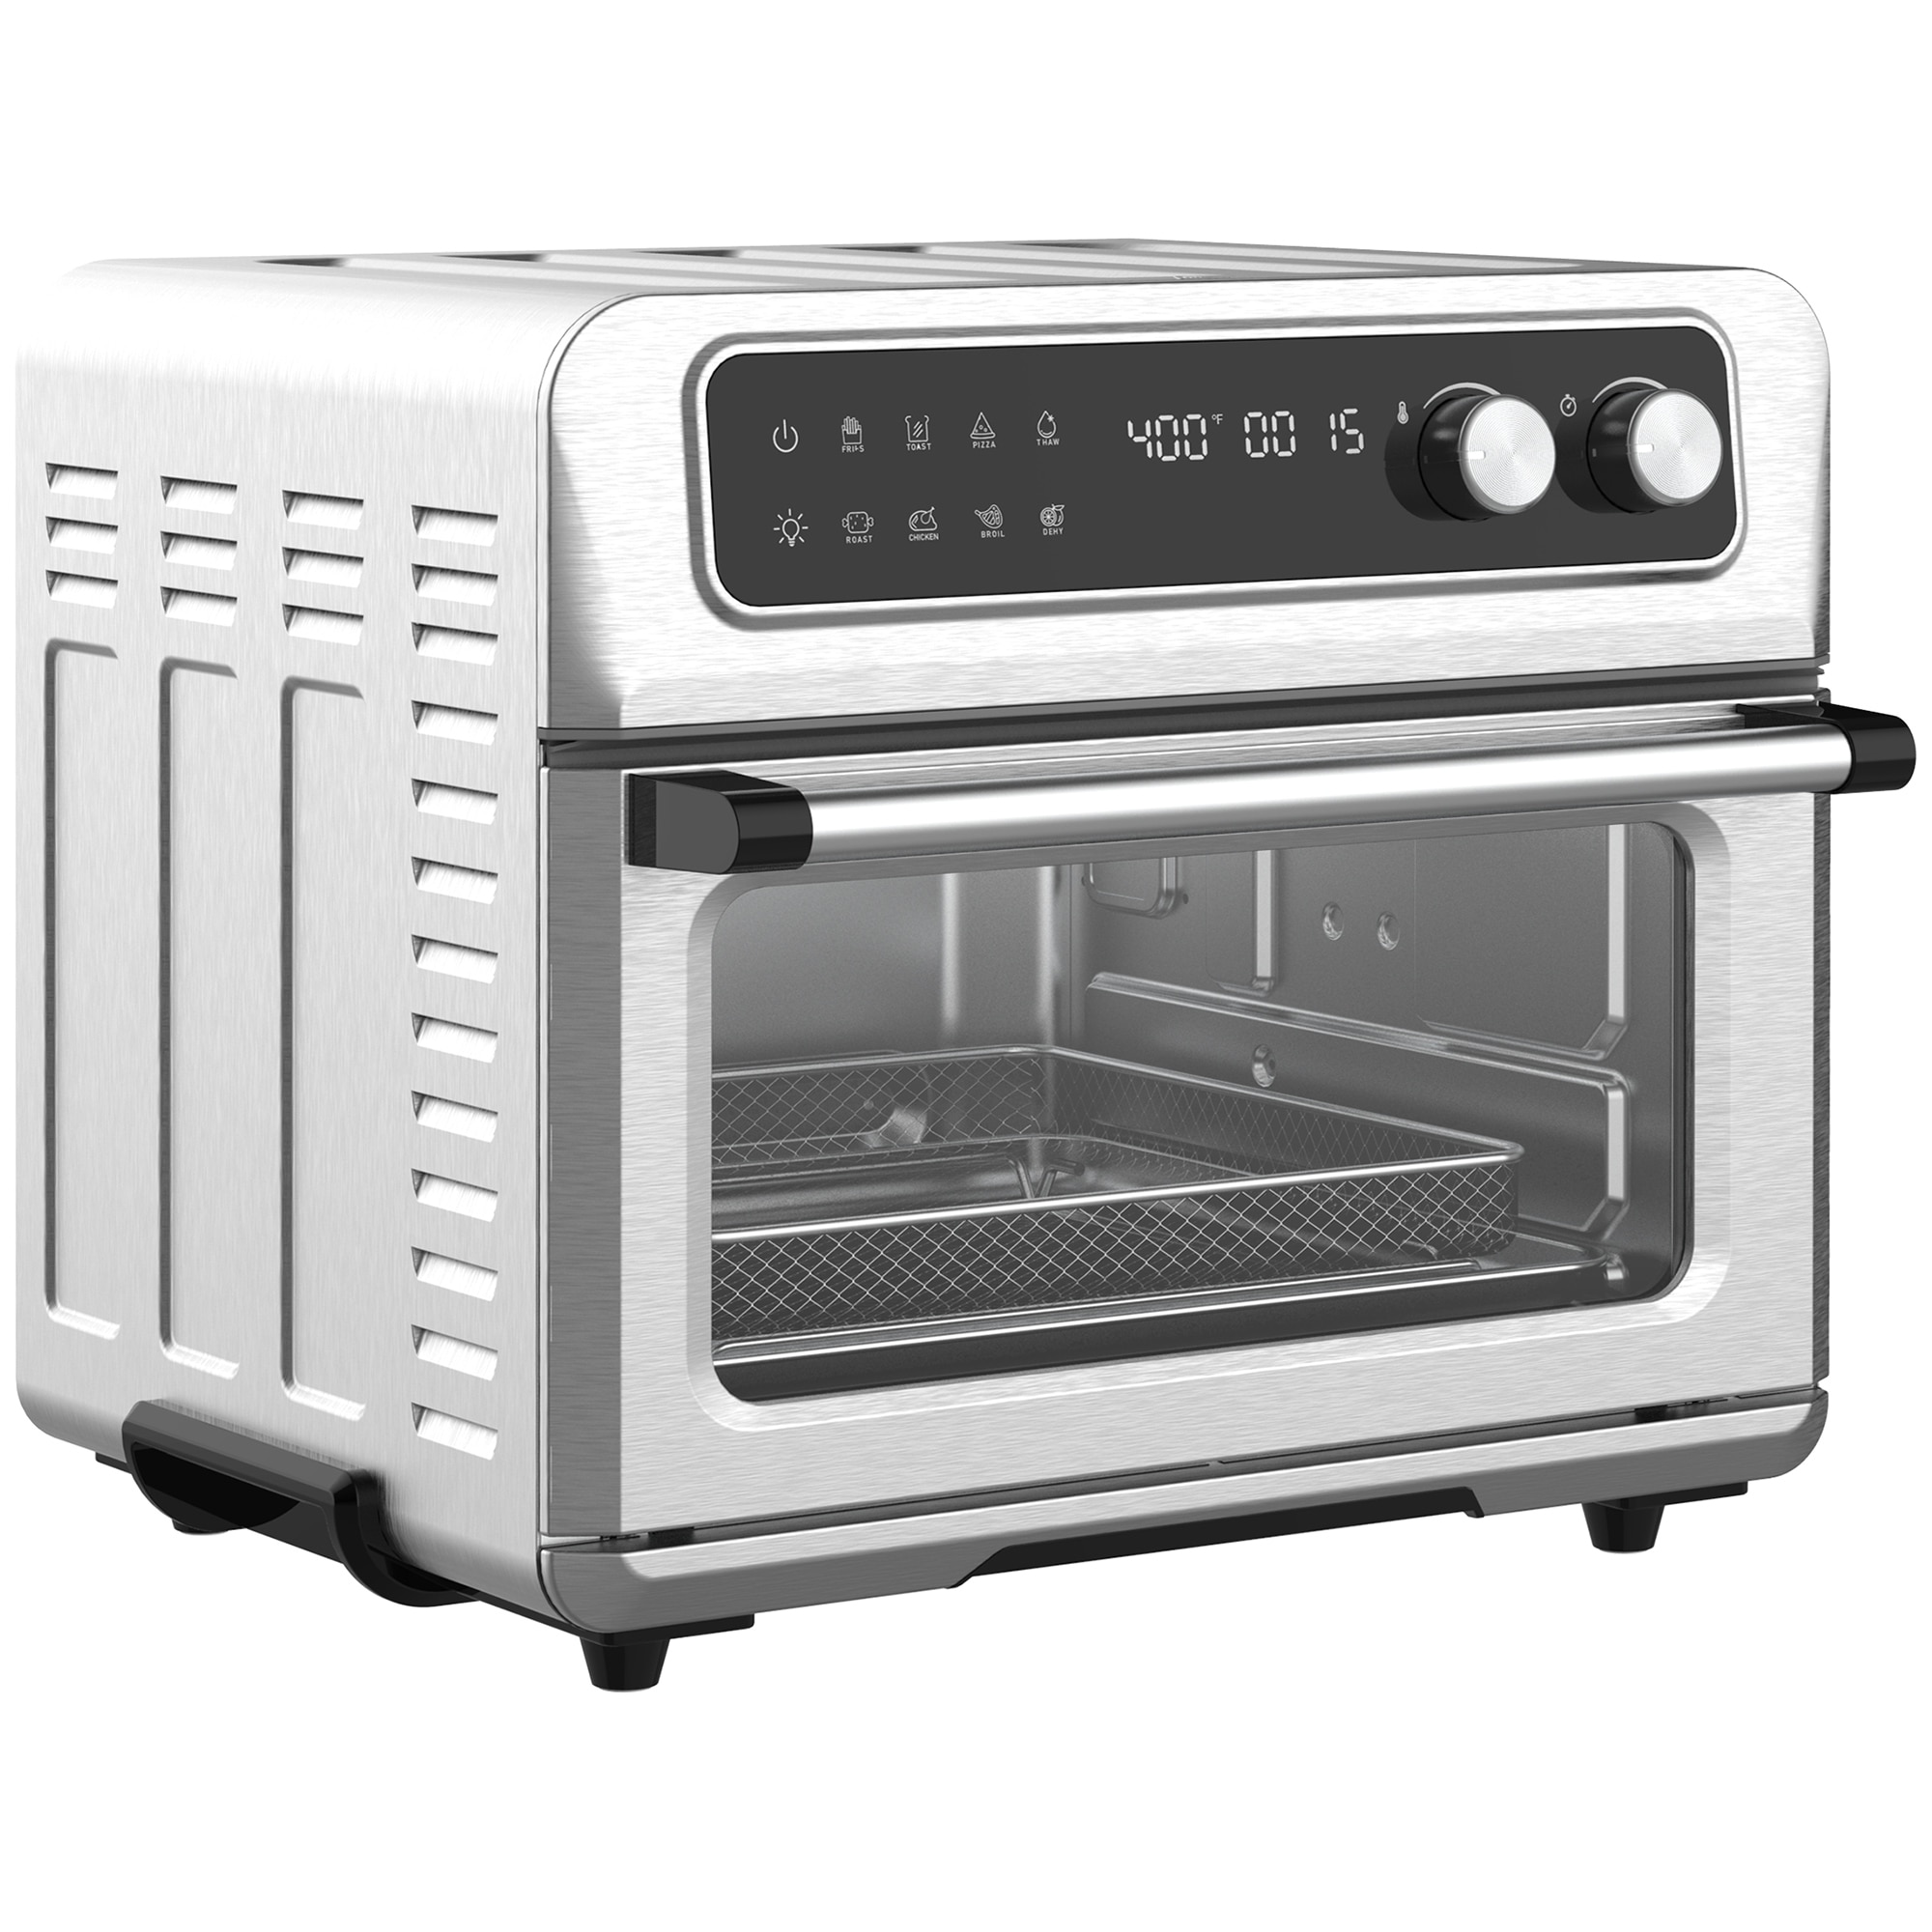 GE Air Fry 6-Slice Stainless Steel Convection Toaster Oven (1500-Watt)